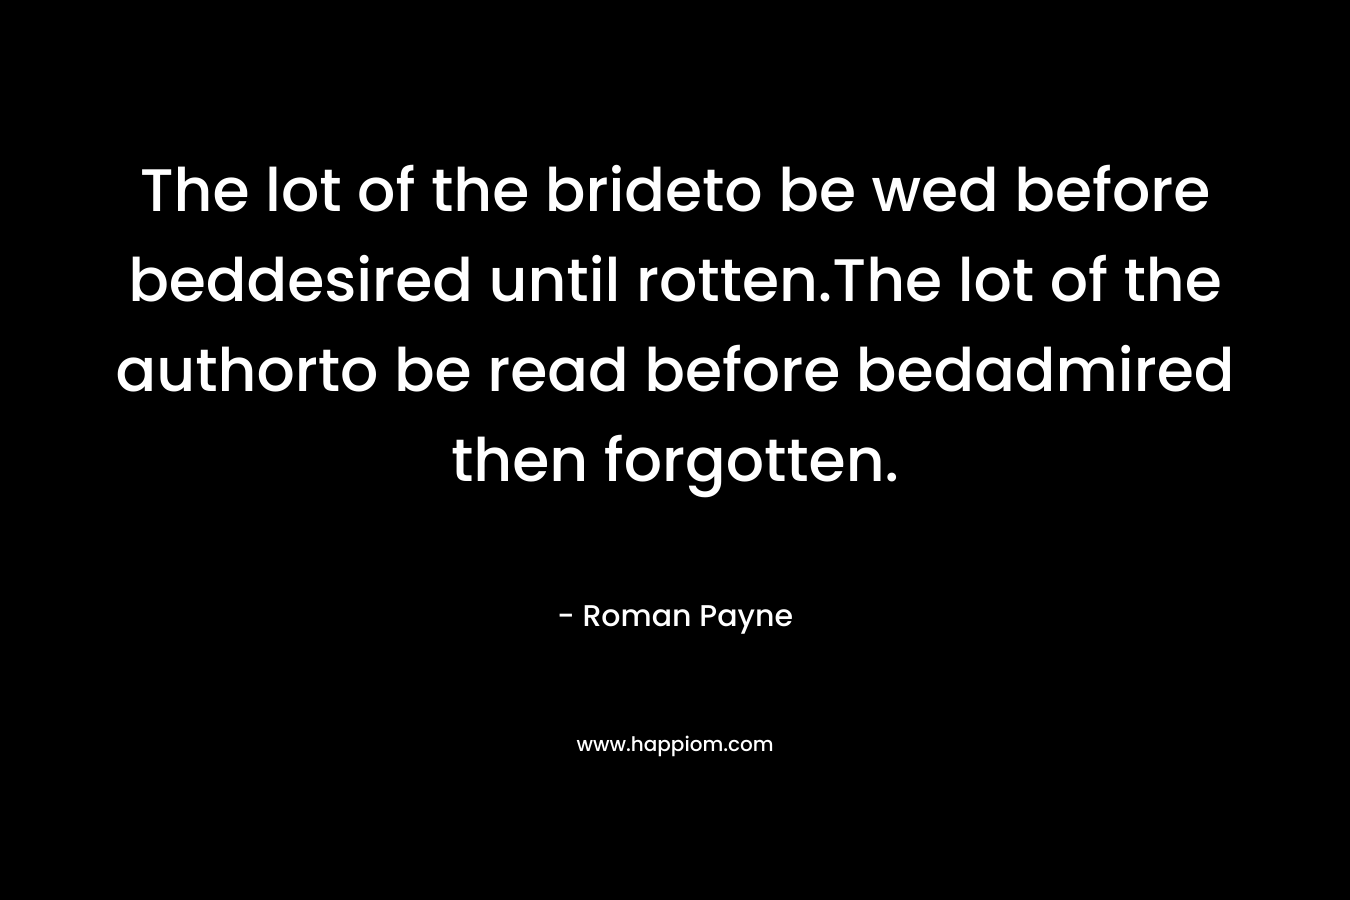 The lot of the brideto be wed before beddesired until rotten.The lot of the authorto be read before bedadmired then forgotten.